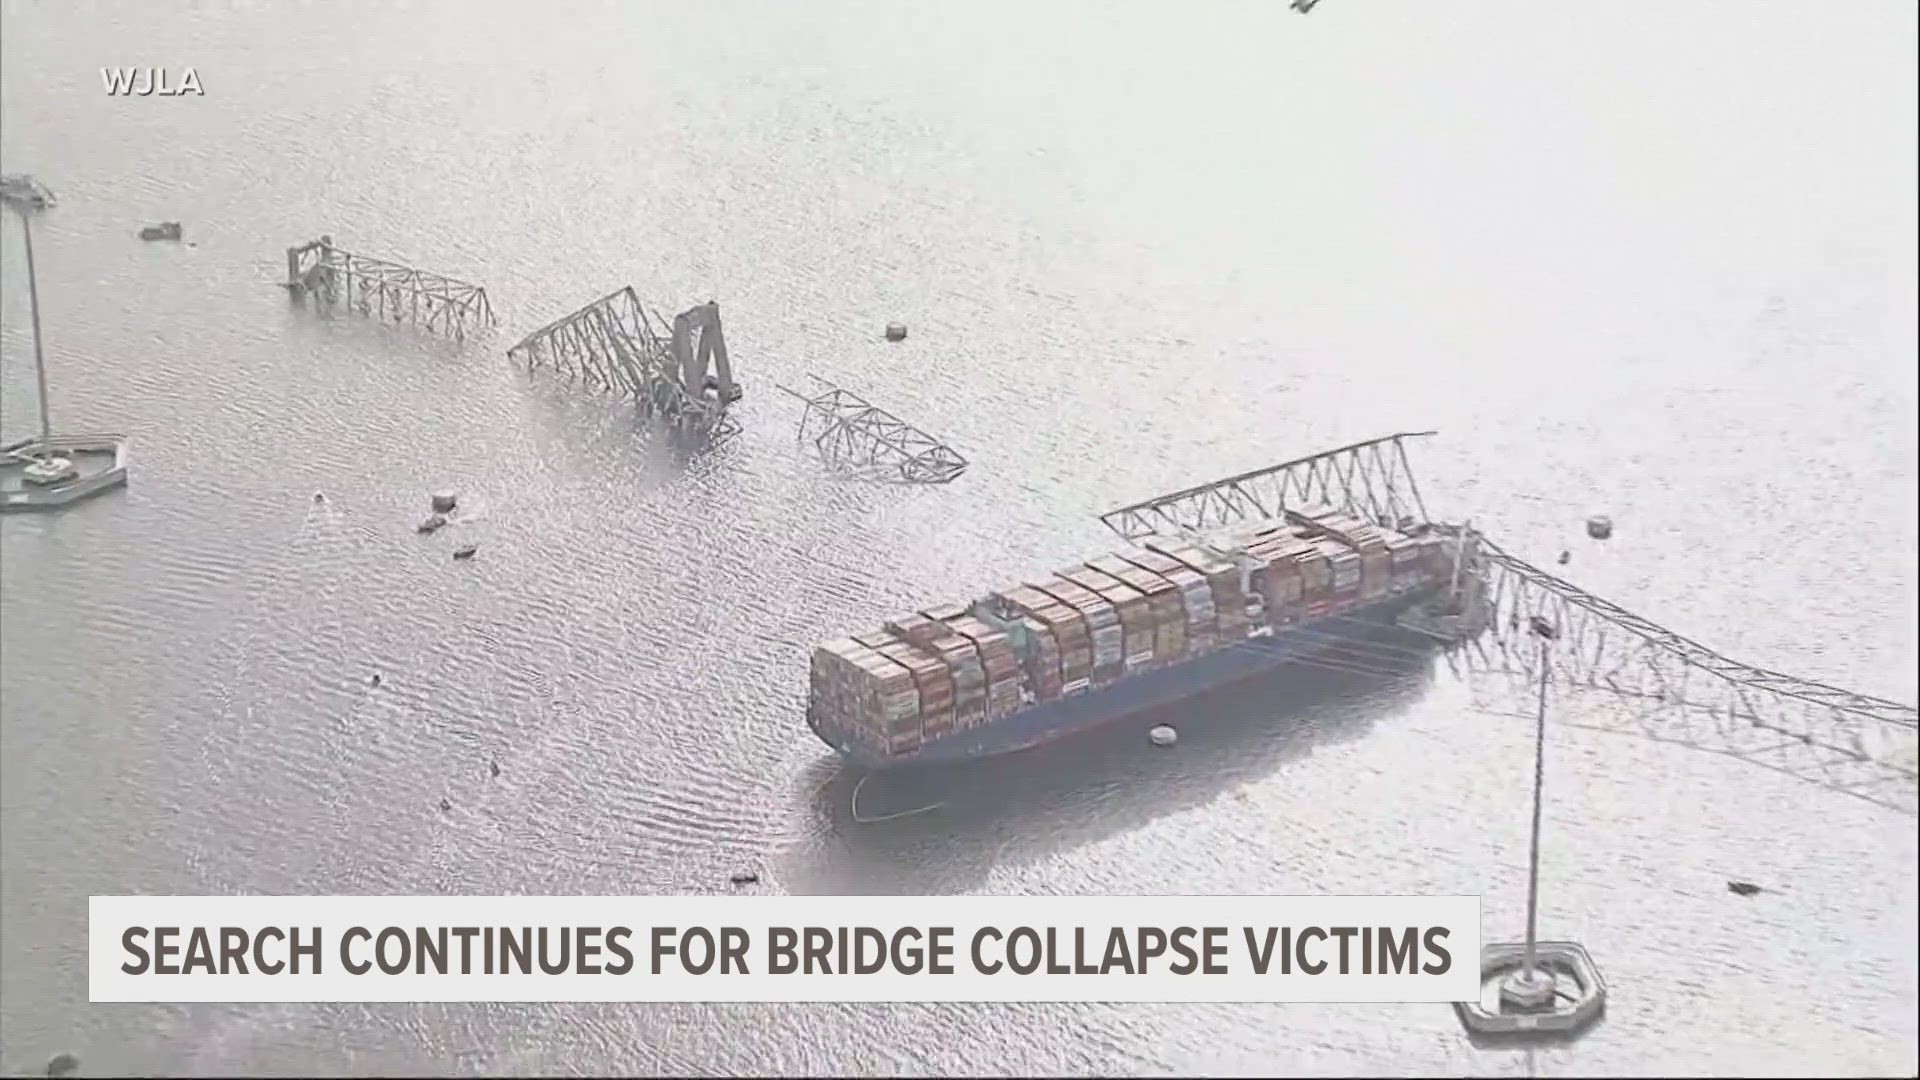 A container ship has rammed into a major bridge in Baltimore, causing it to snap in several places and plunge into the river below.